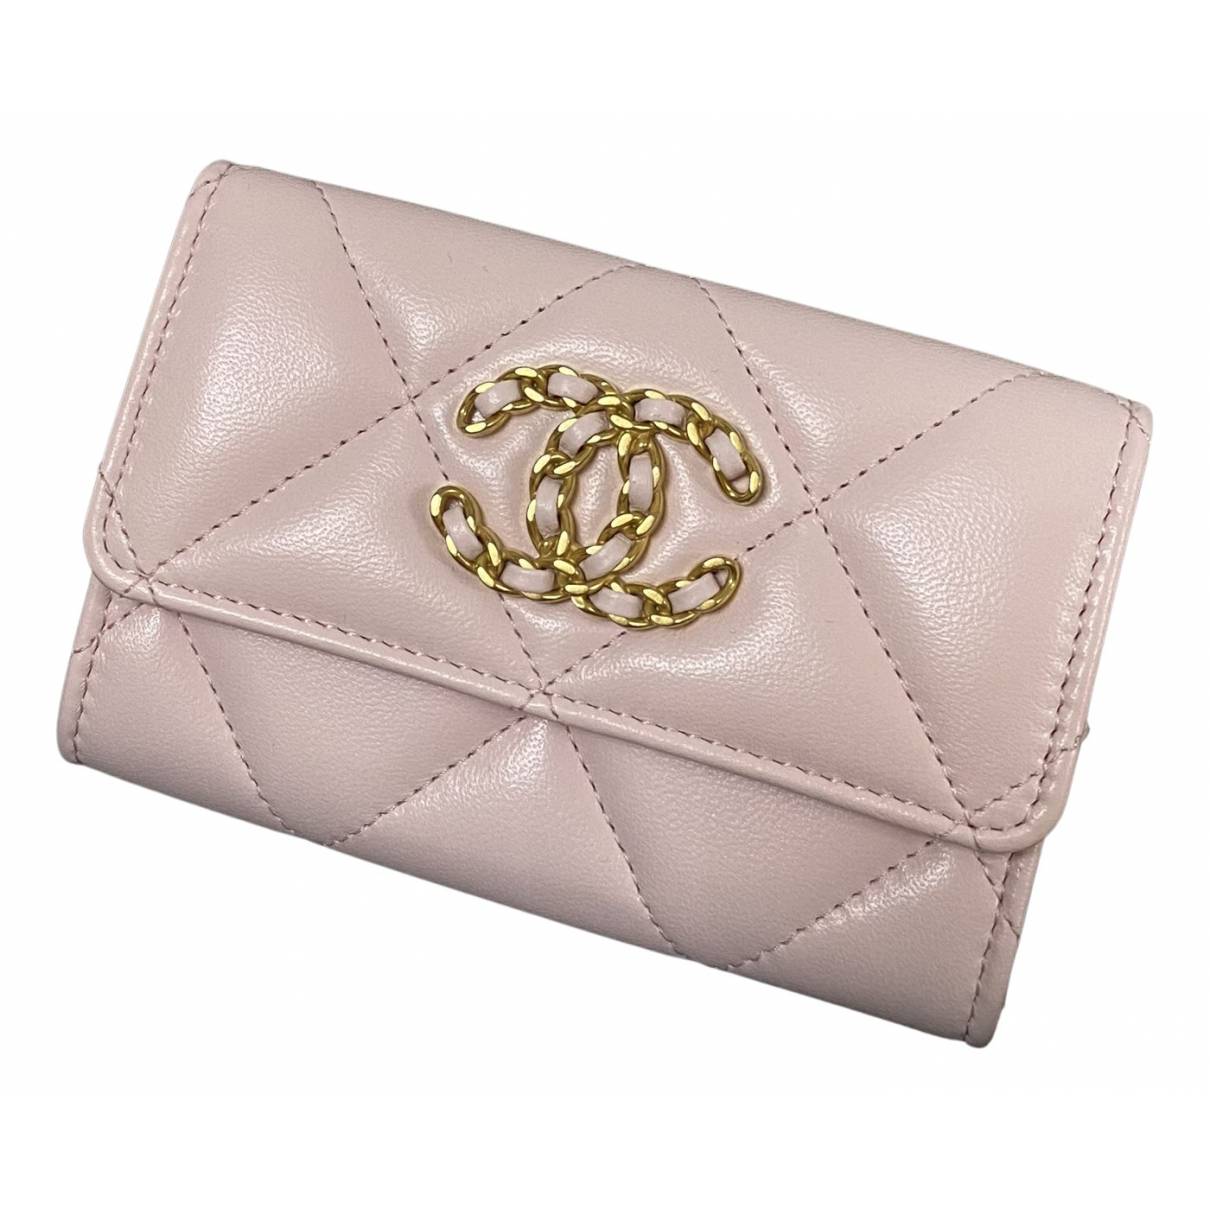 Chanel 19 leather wallet Chanel Pink in Leather - 28136973